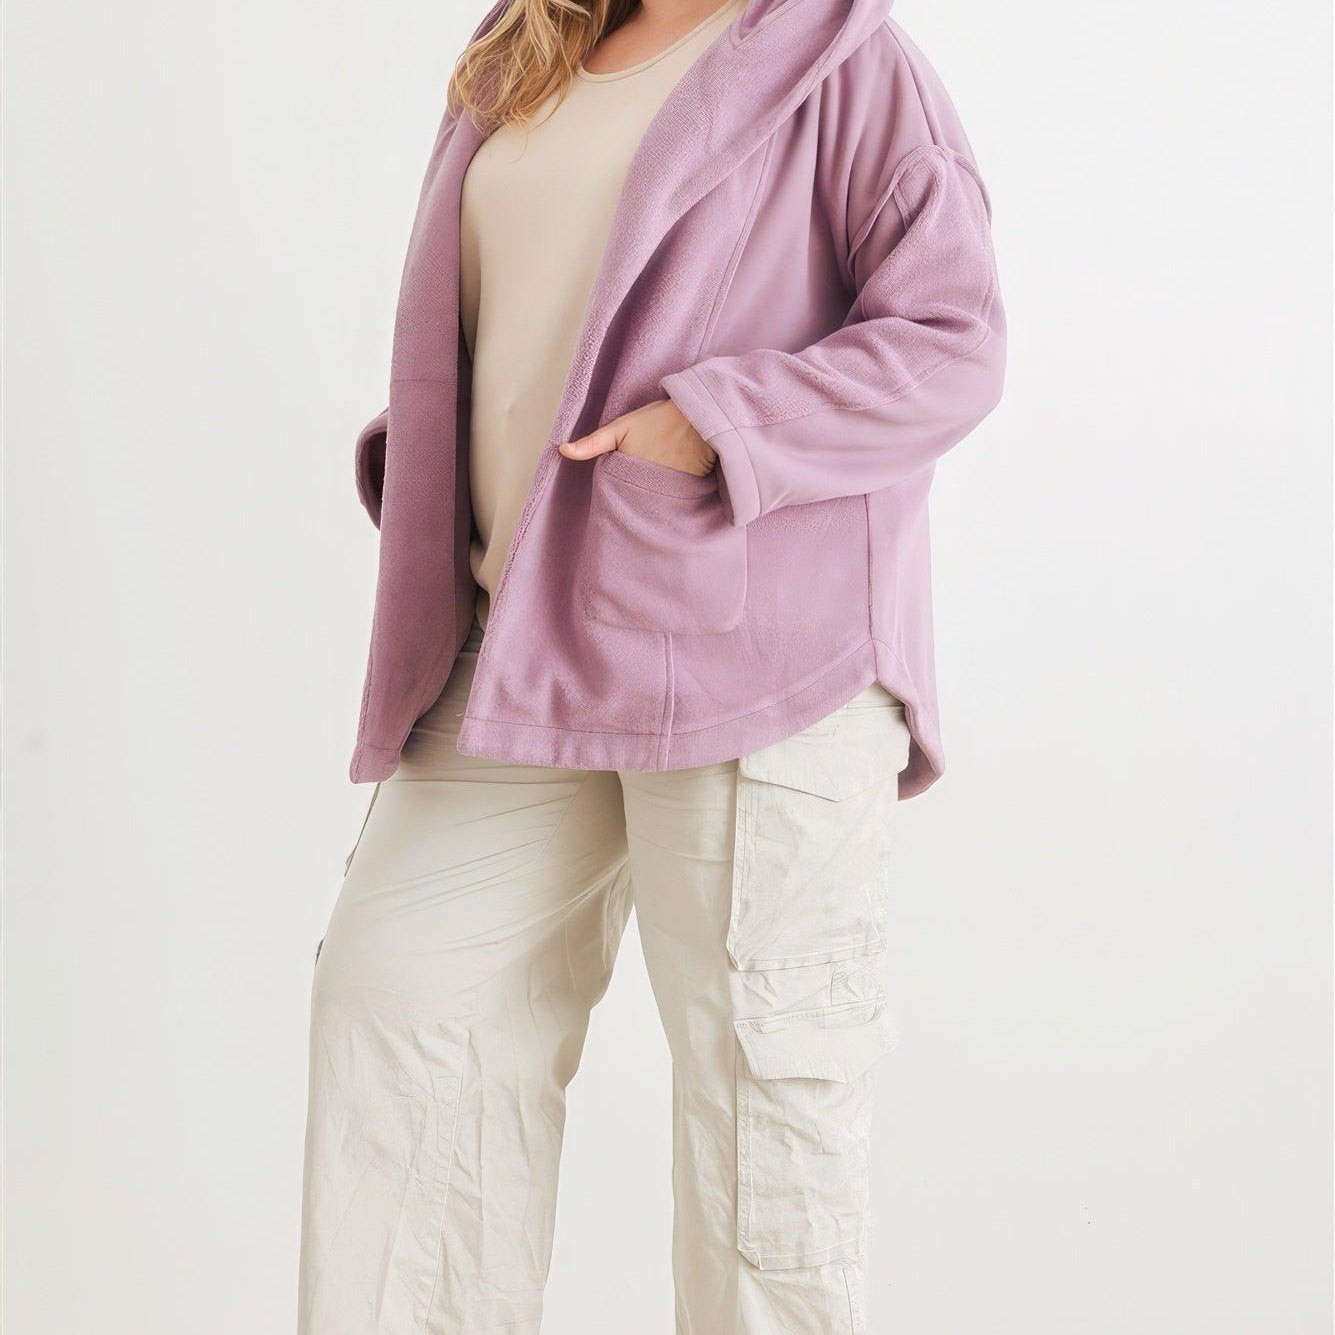 Women's Sweaters - Cardigans Plus Two Pocket Open Front Soft To Touch Hooded Cardigan Jacket